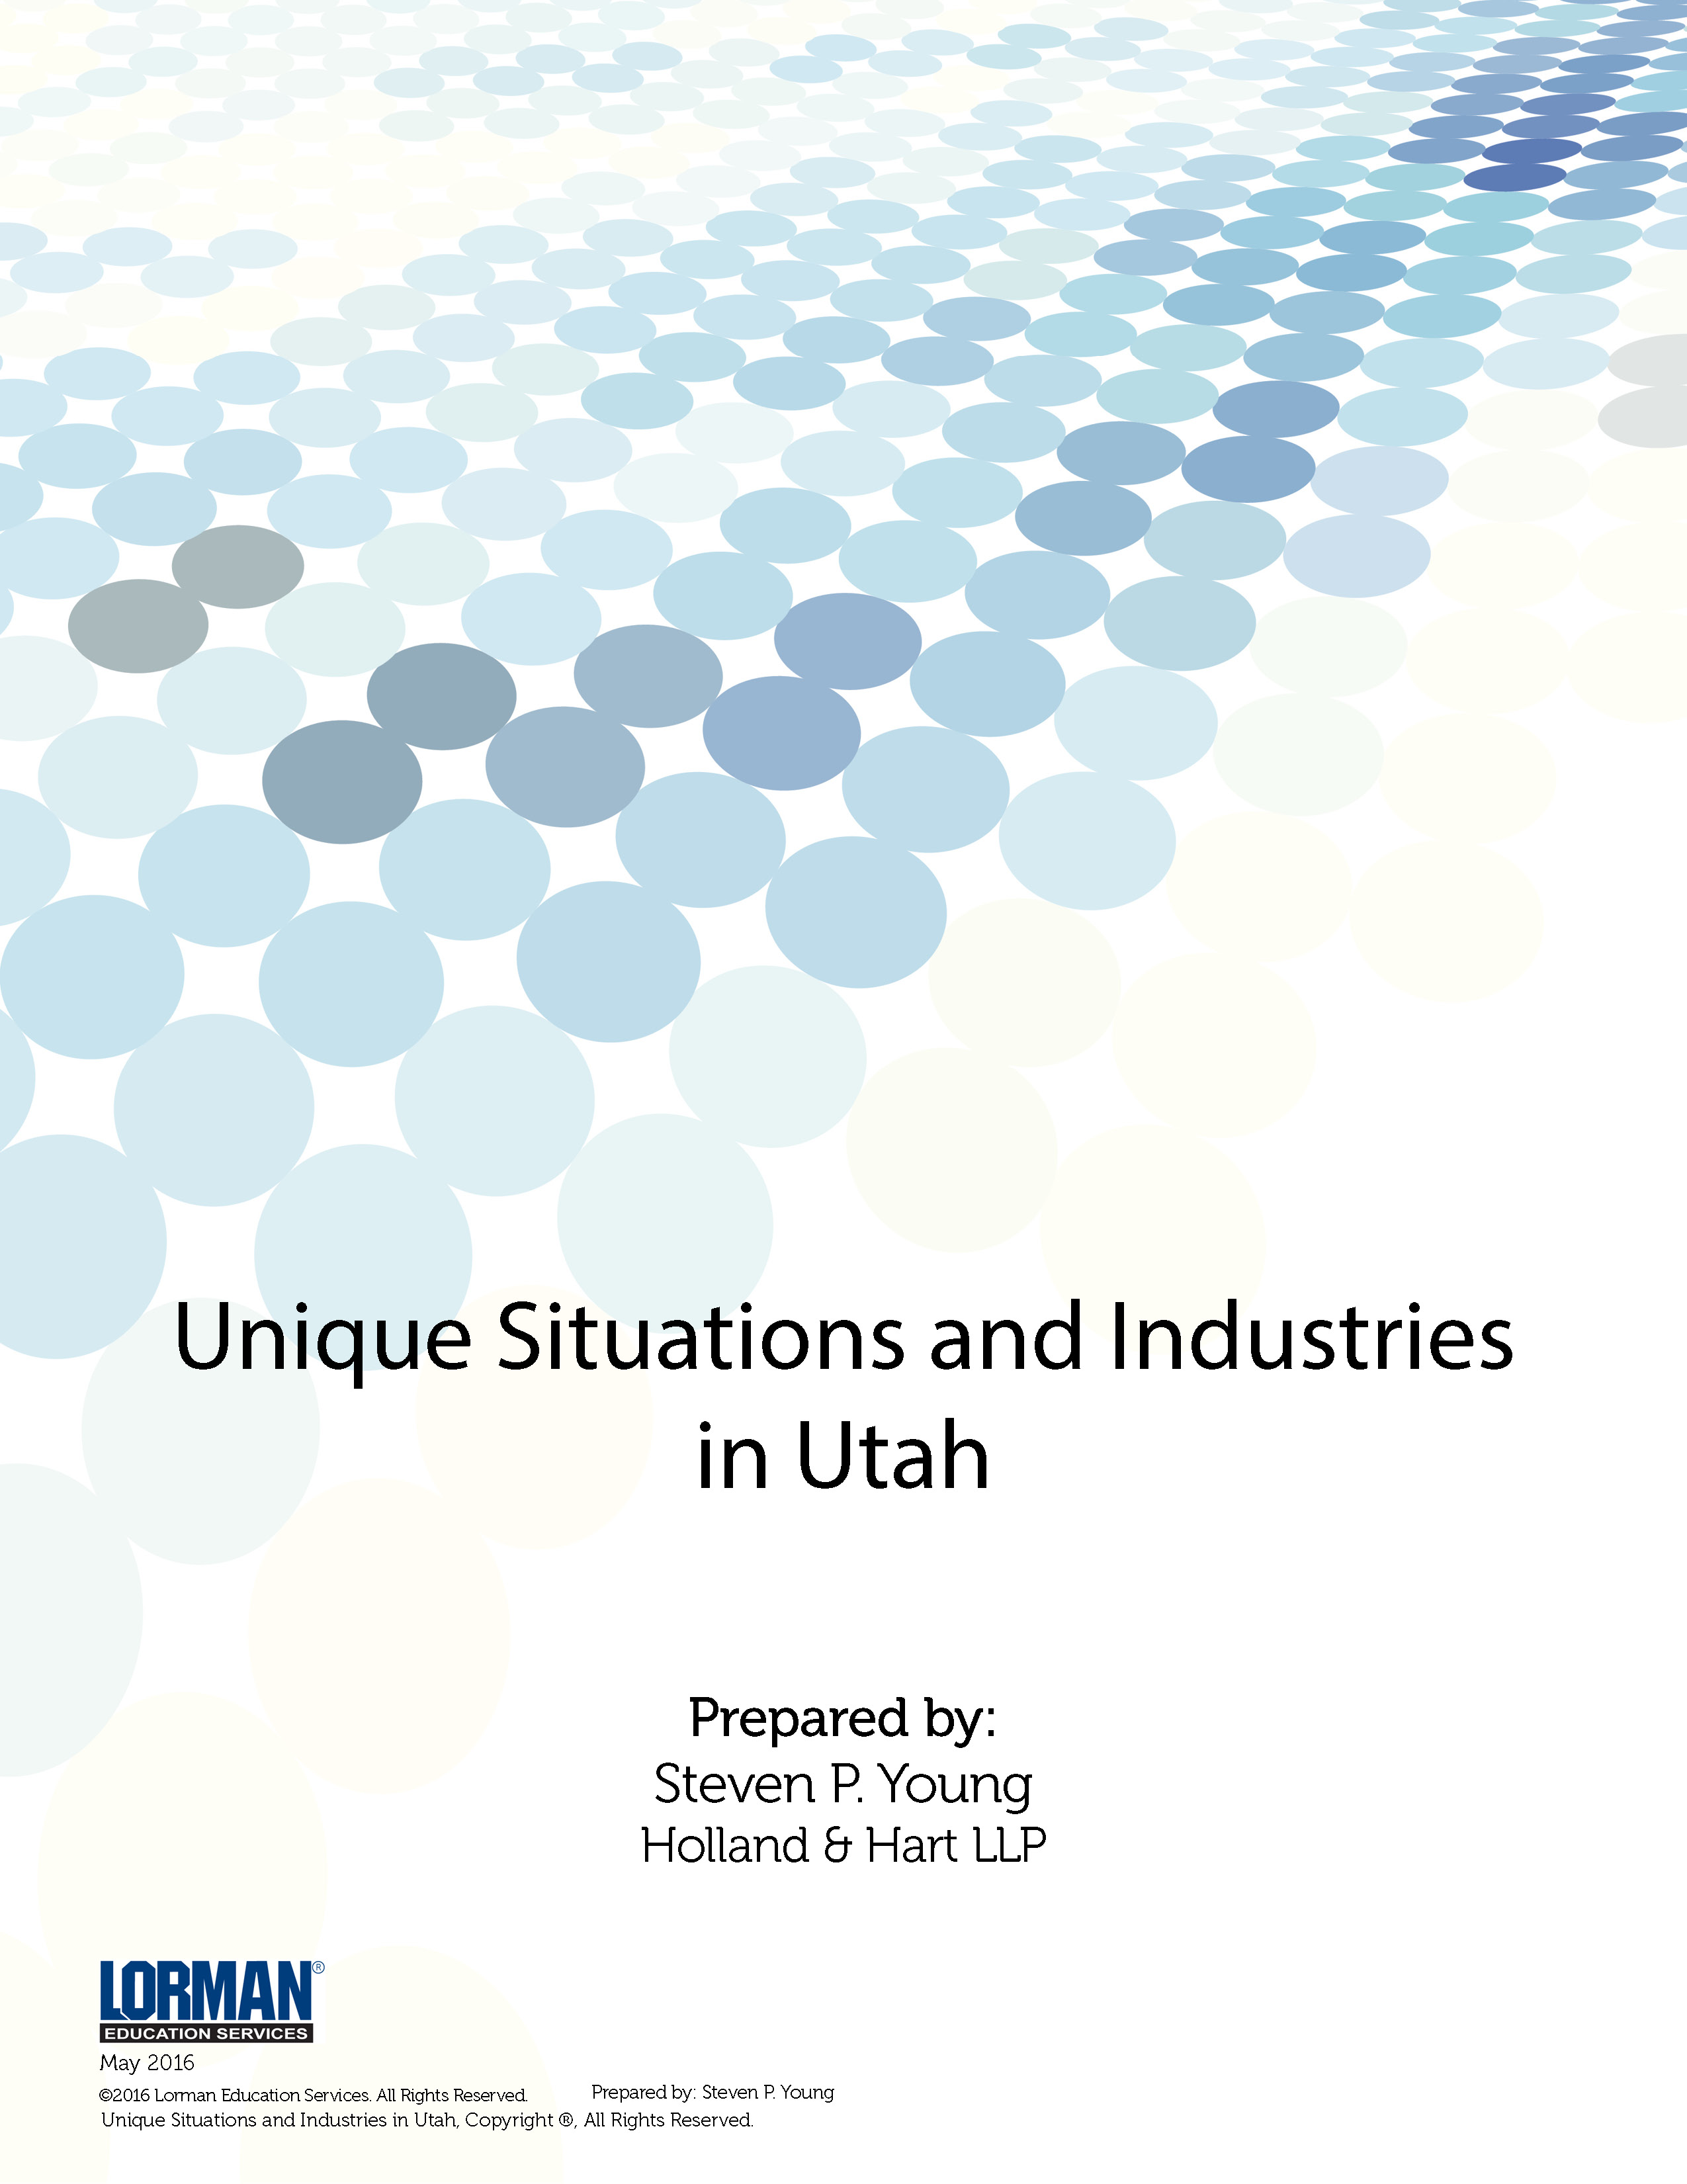 Unique Situations and Industries in Utah